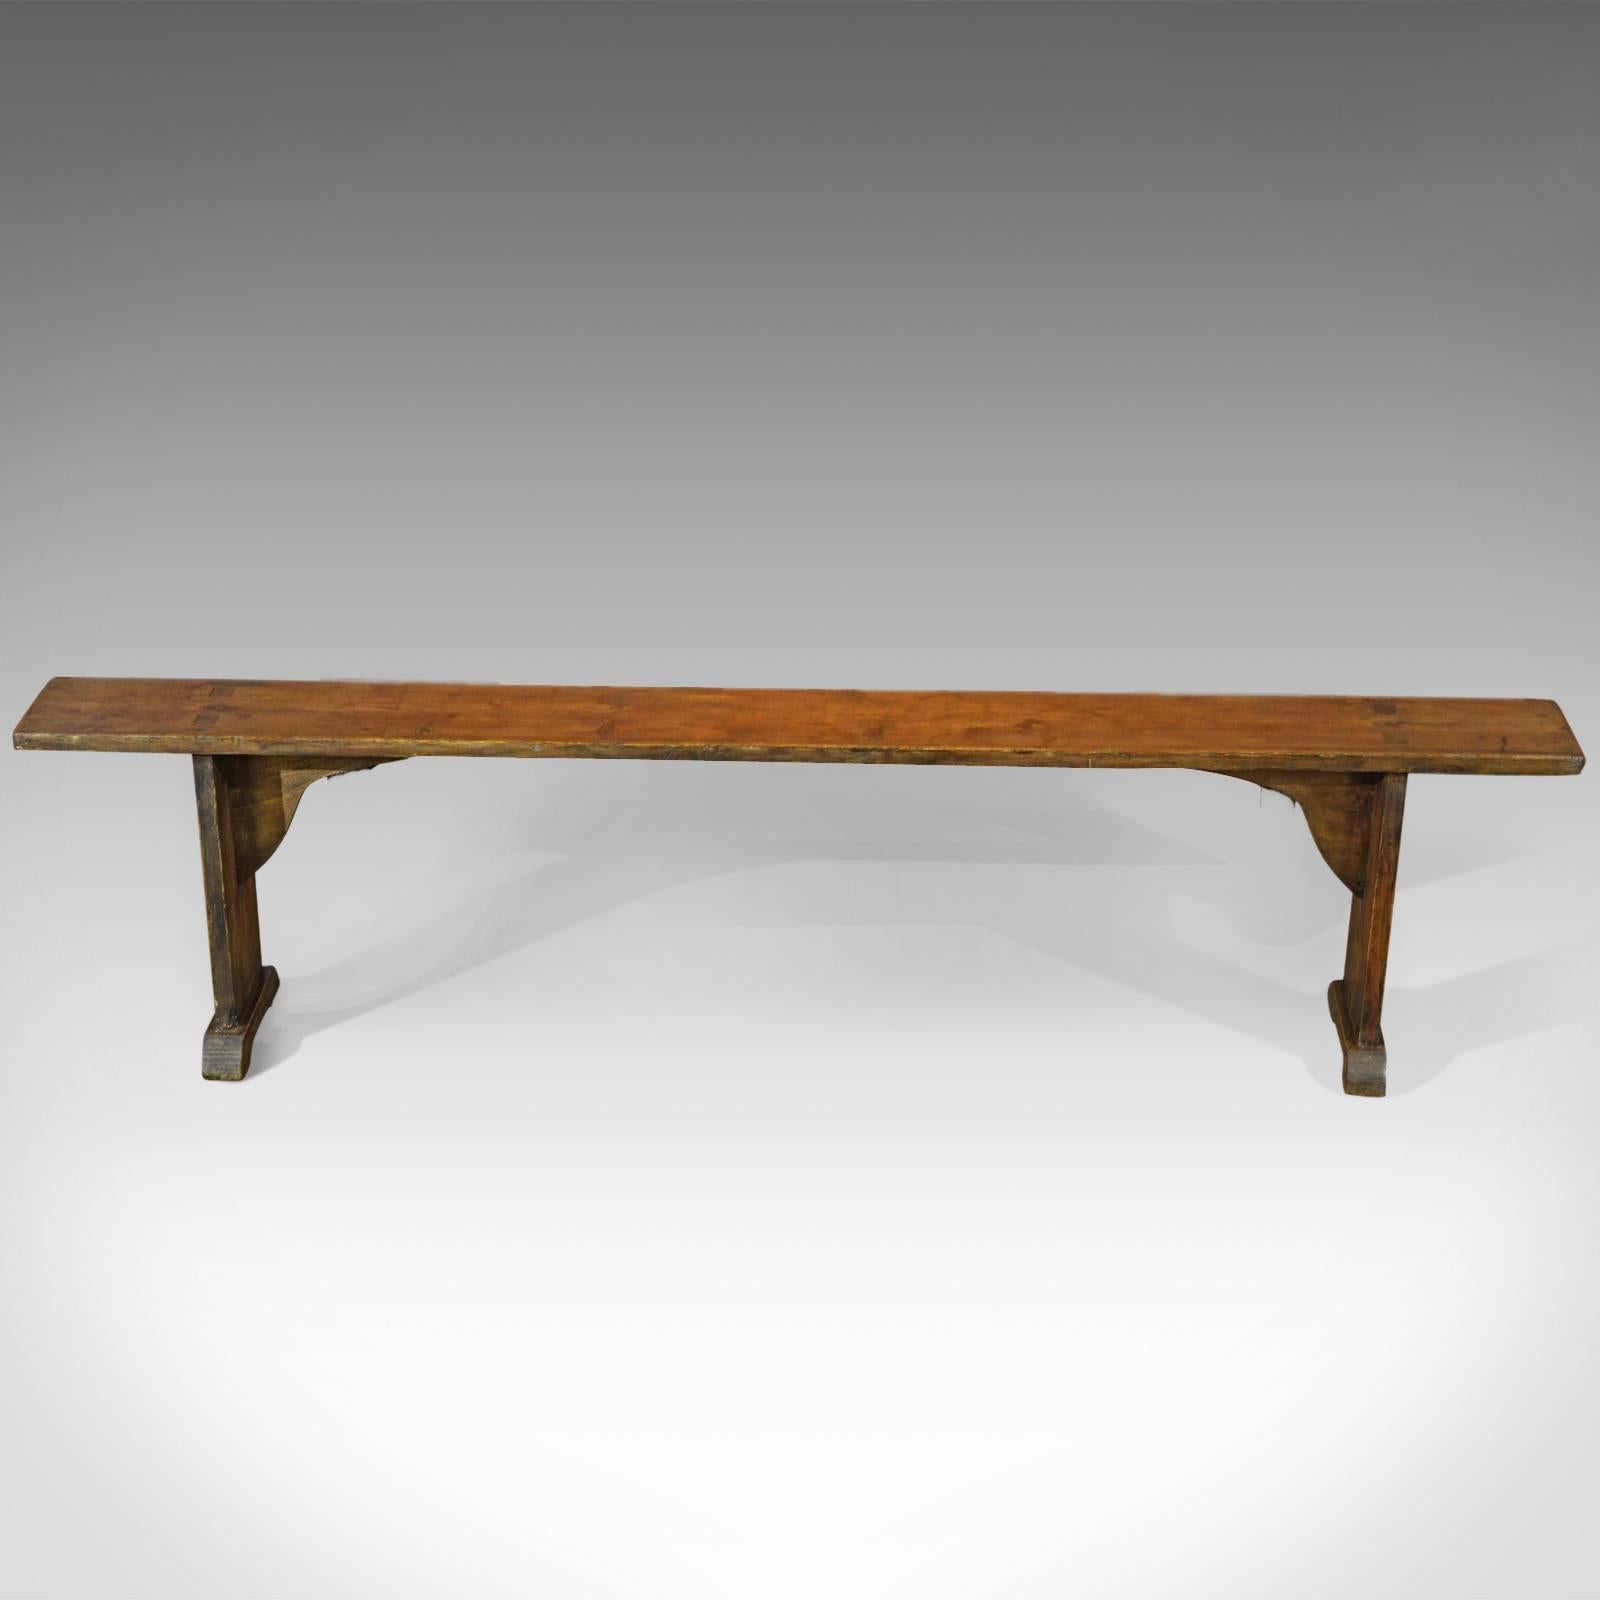 This is an antique bench dating to the turn of the century, circa 1900.

Raised on block section feet, this rustic pair of benches offer stable and generous seating and a nice alternative to dining chairs in a country kitchen.

Traditionally